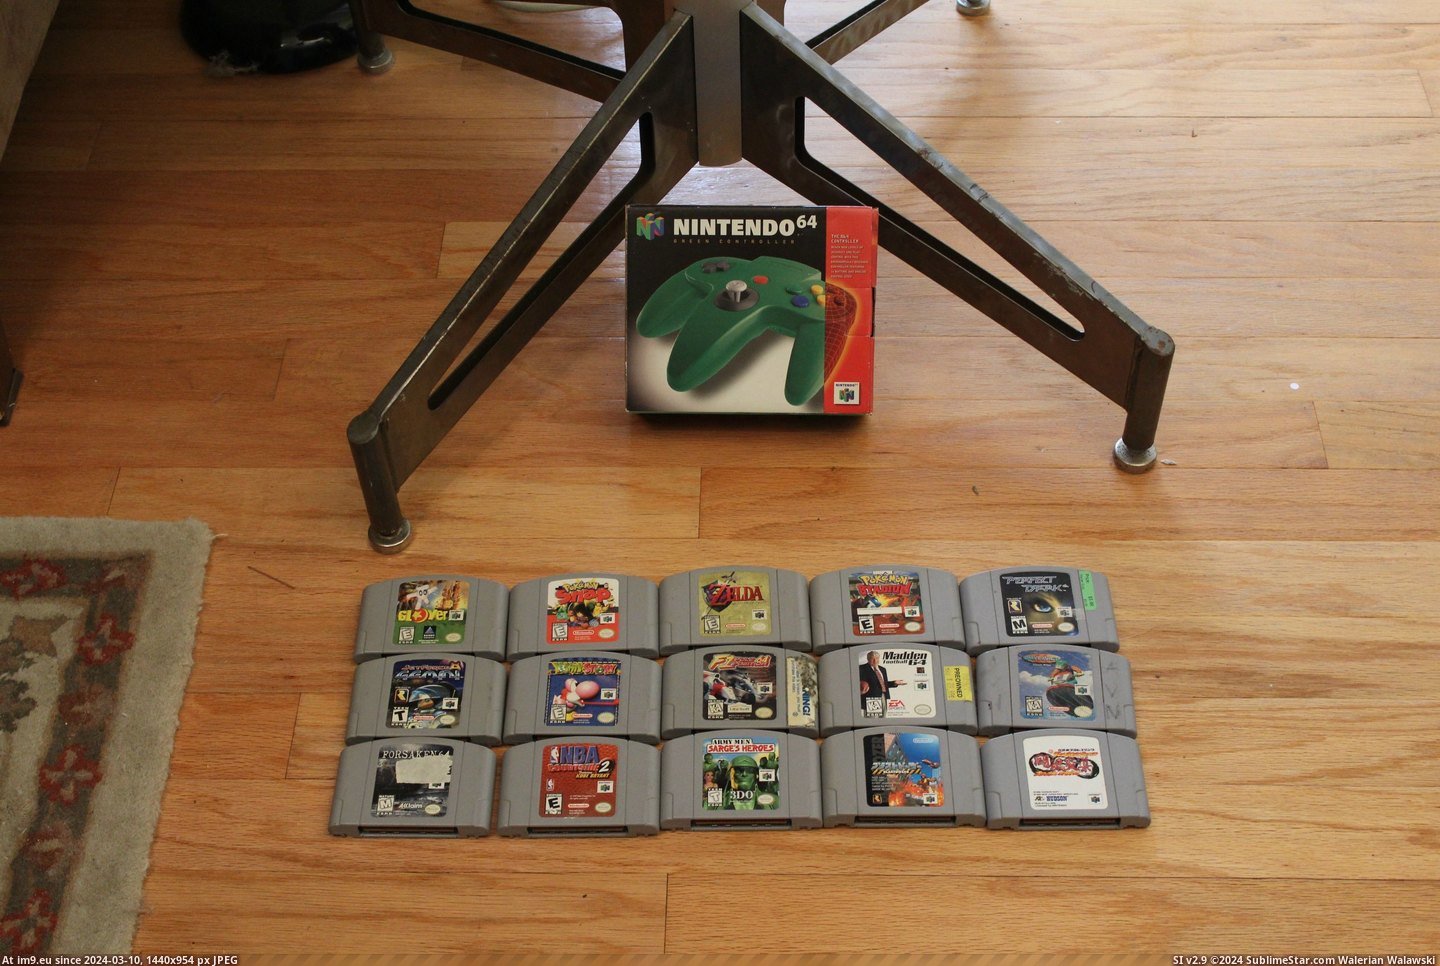 #Gaming #Year #Ago #Off #Demo #Craigslist #Unit #Rarest #Bought #Store #Own #N64 [Gaming] Bought a N64 Store Demo Unit off Craigslist 1 year ago. Probably the rarest thing I own. 6 Pic. (Bild von album My r/GAMING favs))